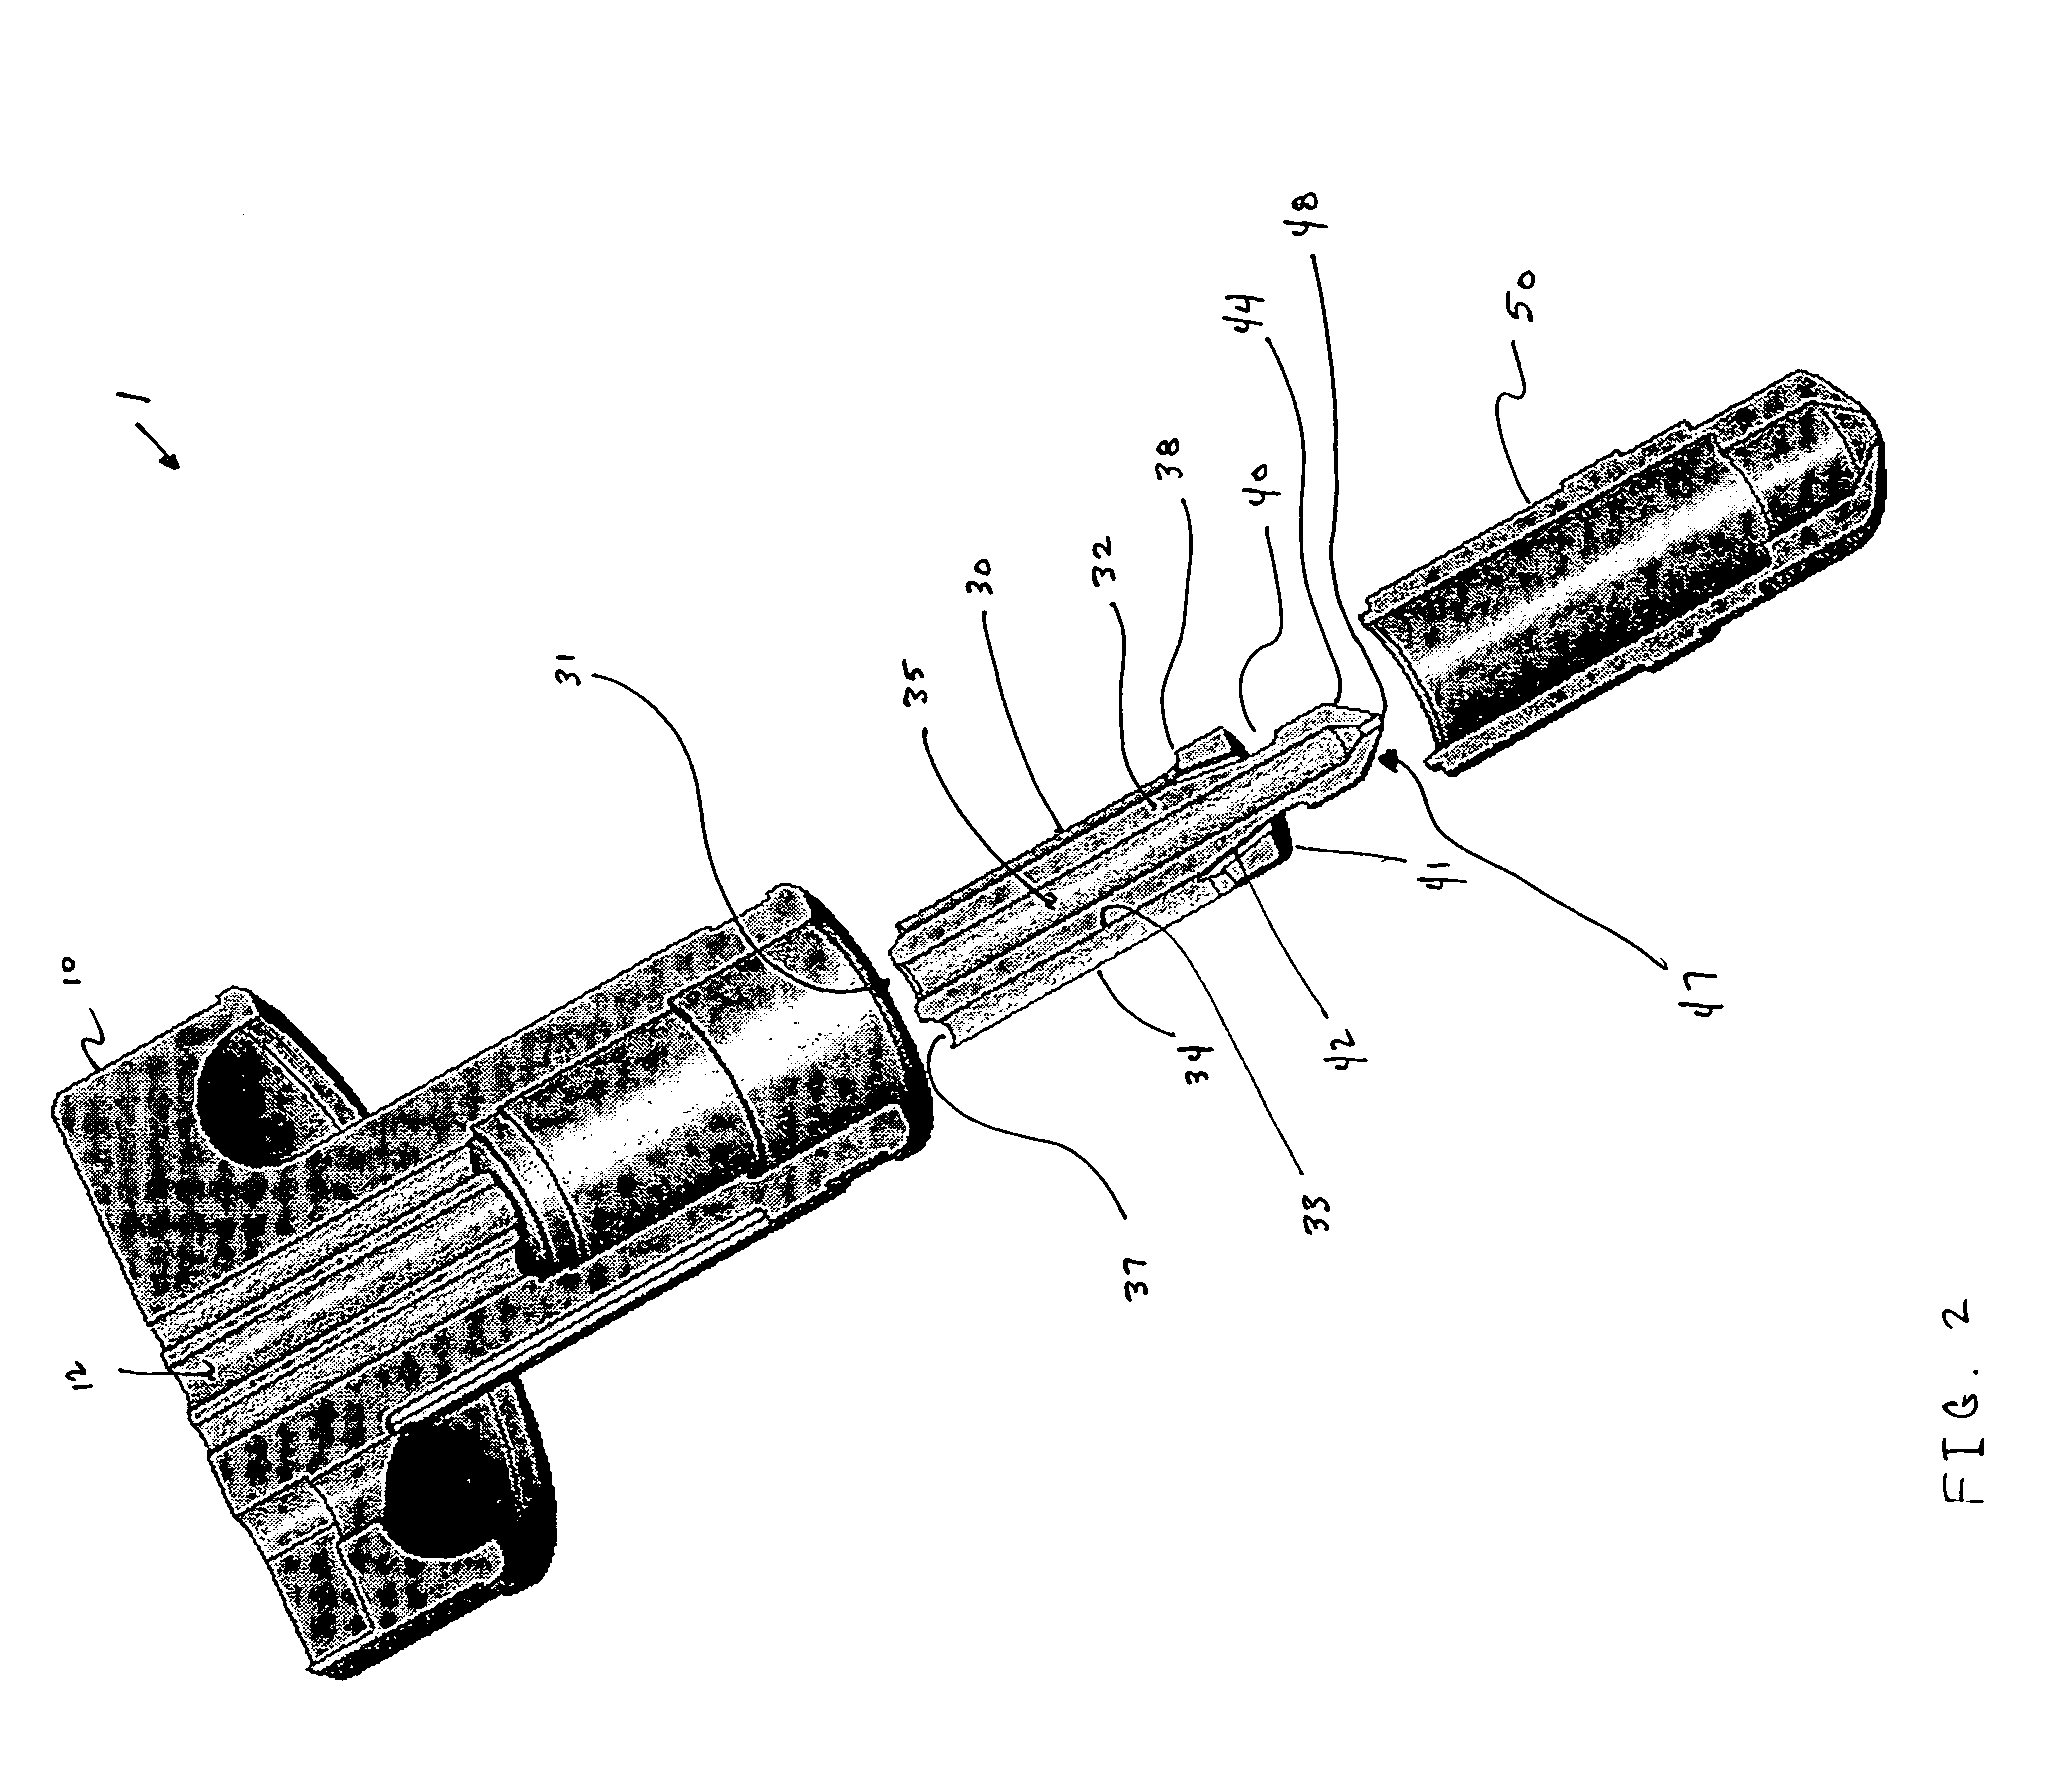 Co-injection nozzle